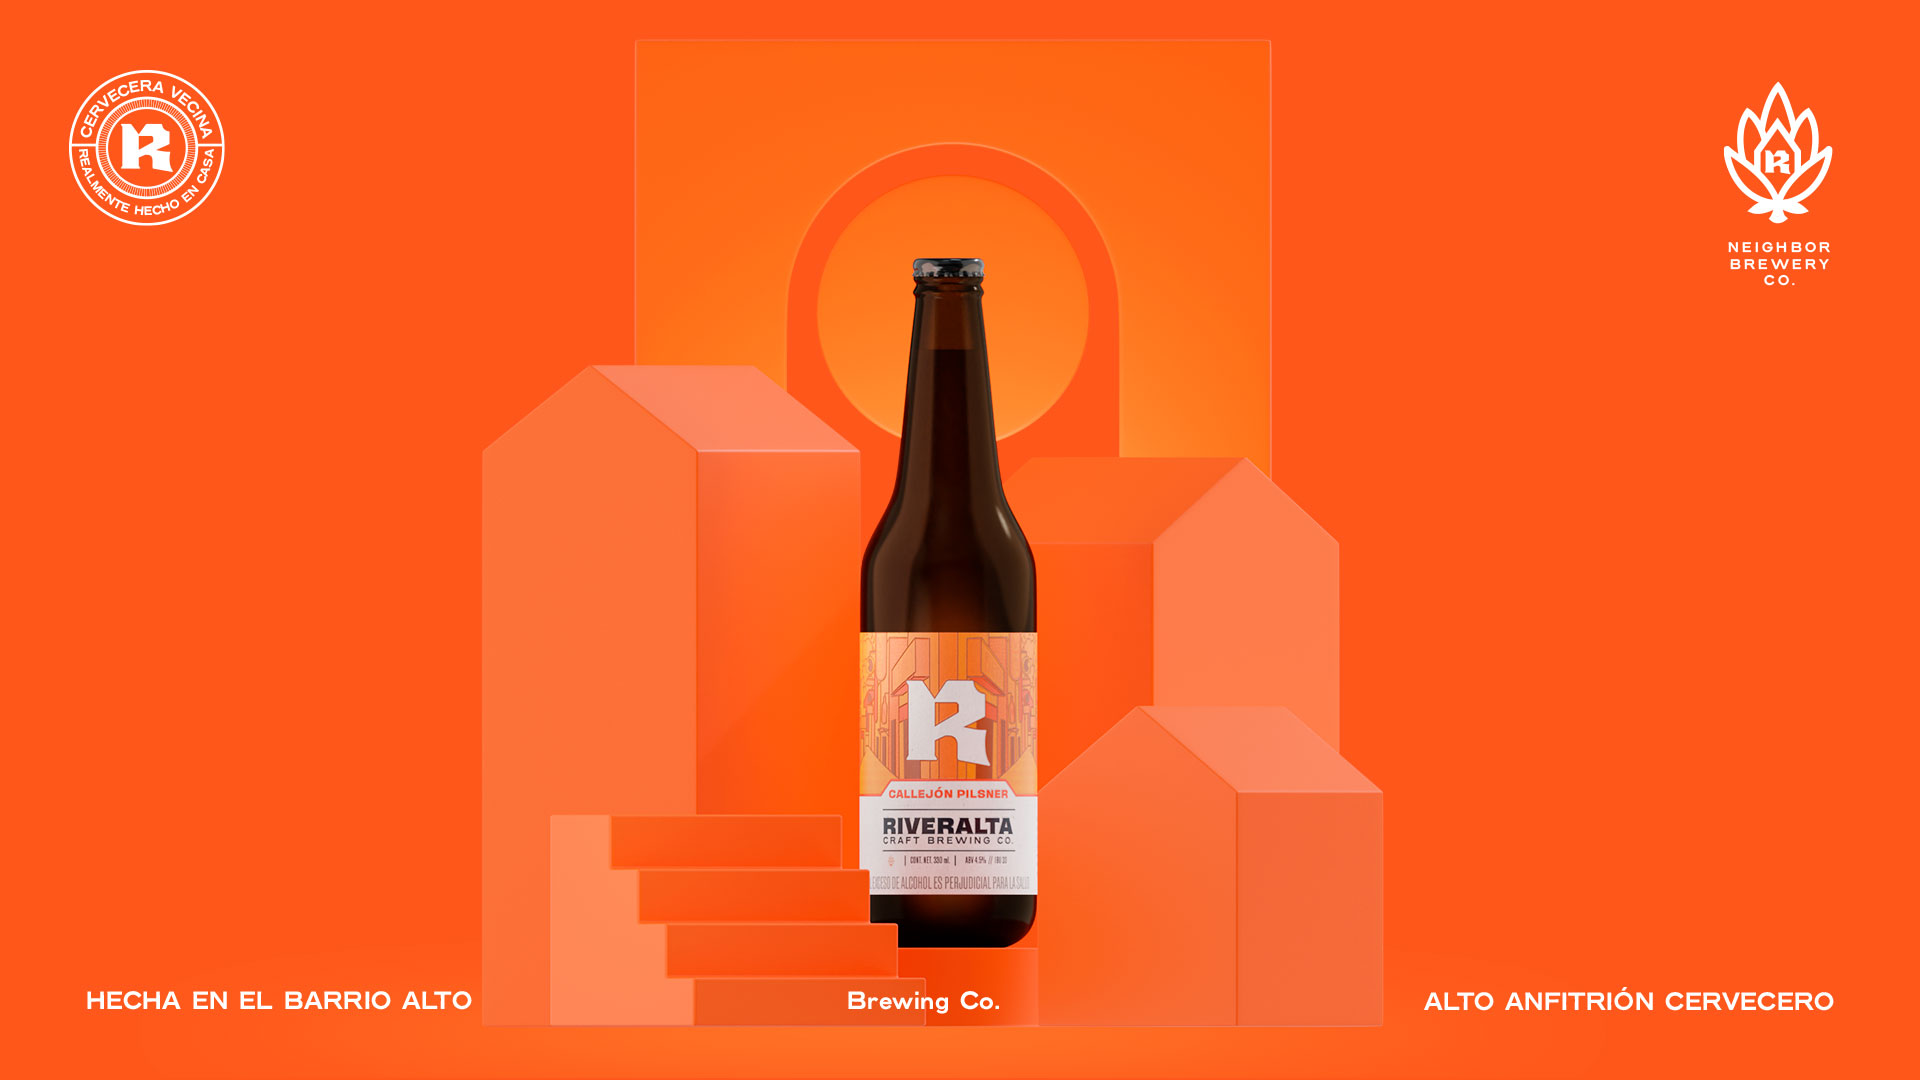 Riveralta Brewing Co Branding And Packaging Design